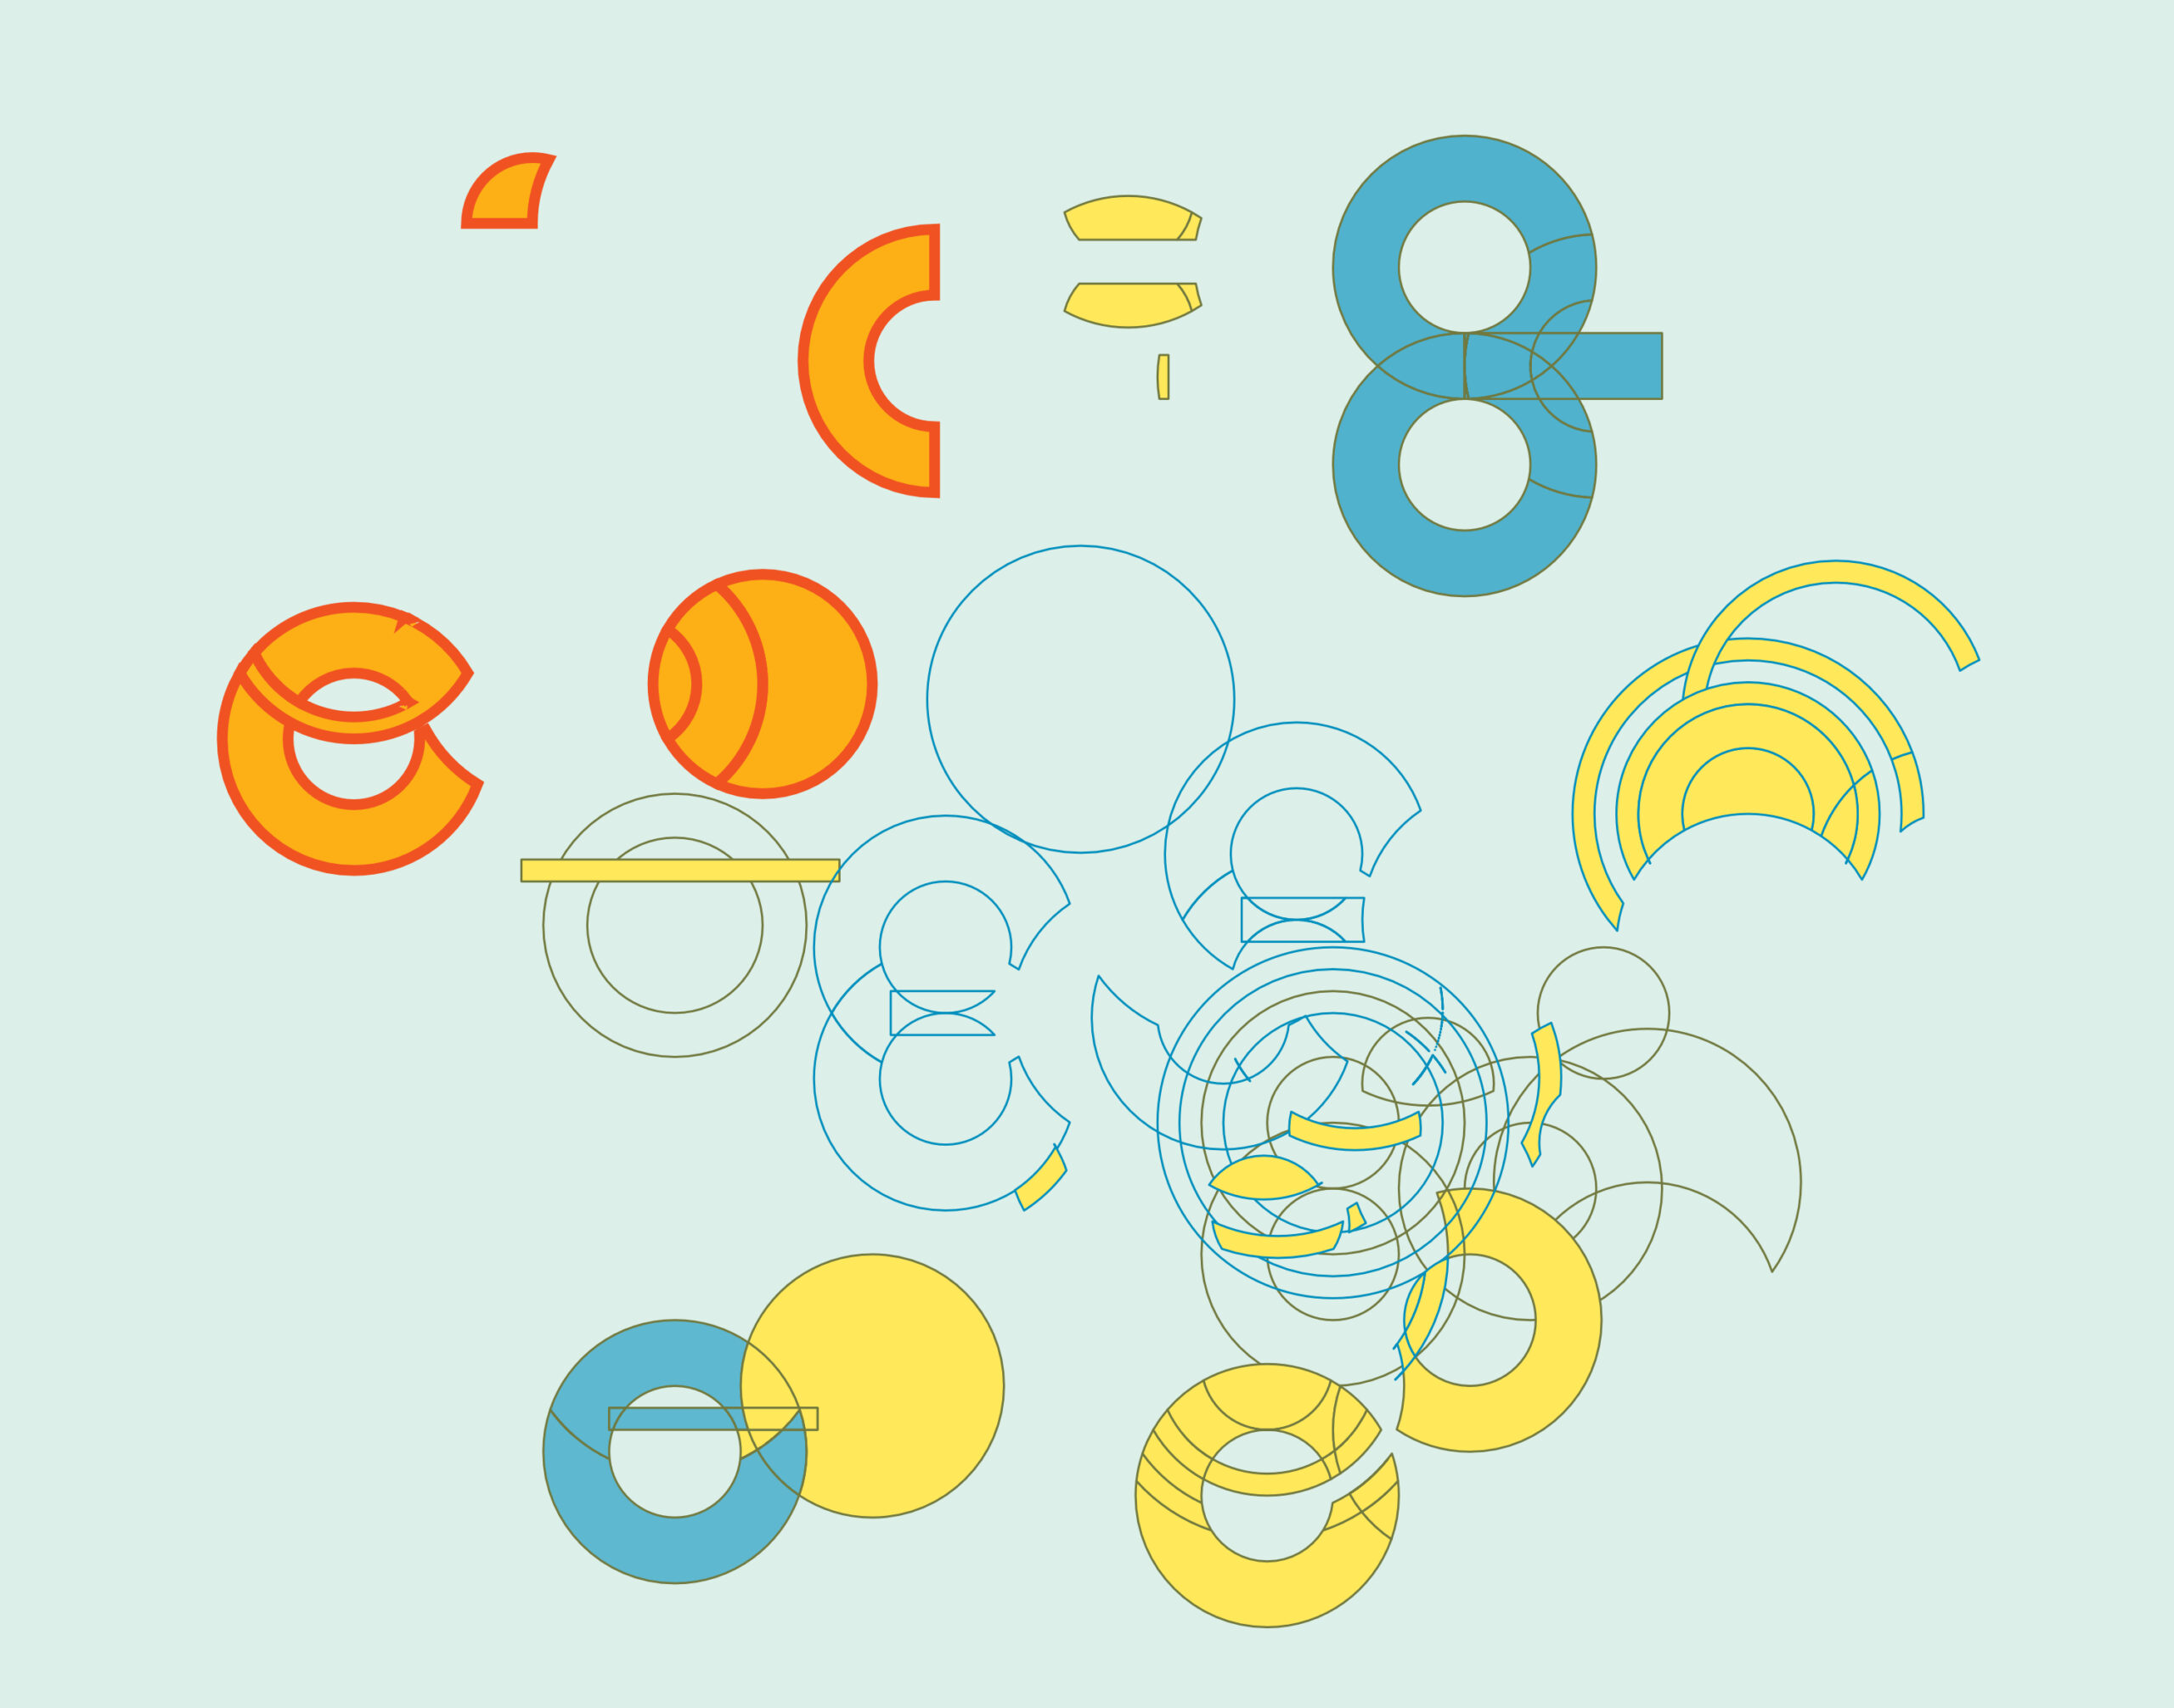 blue, yellow, and orange shapes derived from circles, shown on blue background